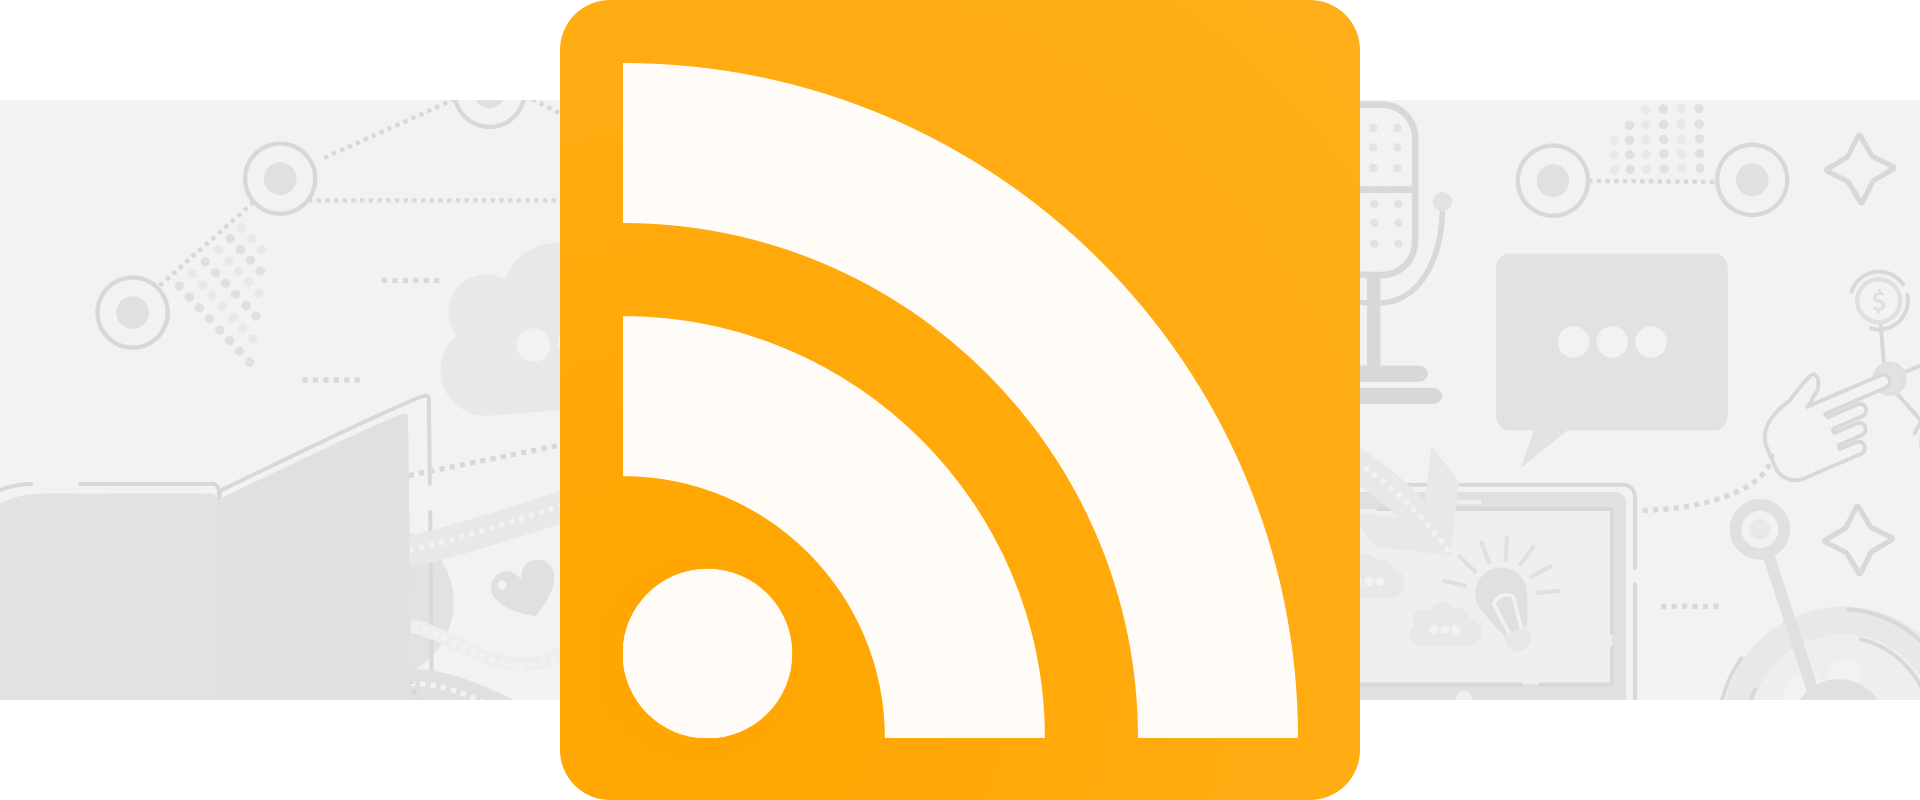 rss feed feeder free download